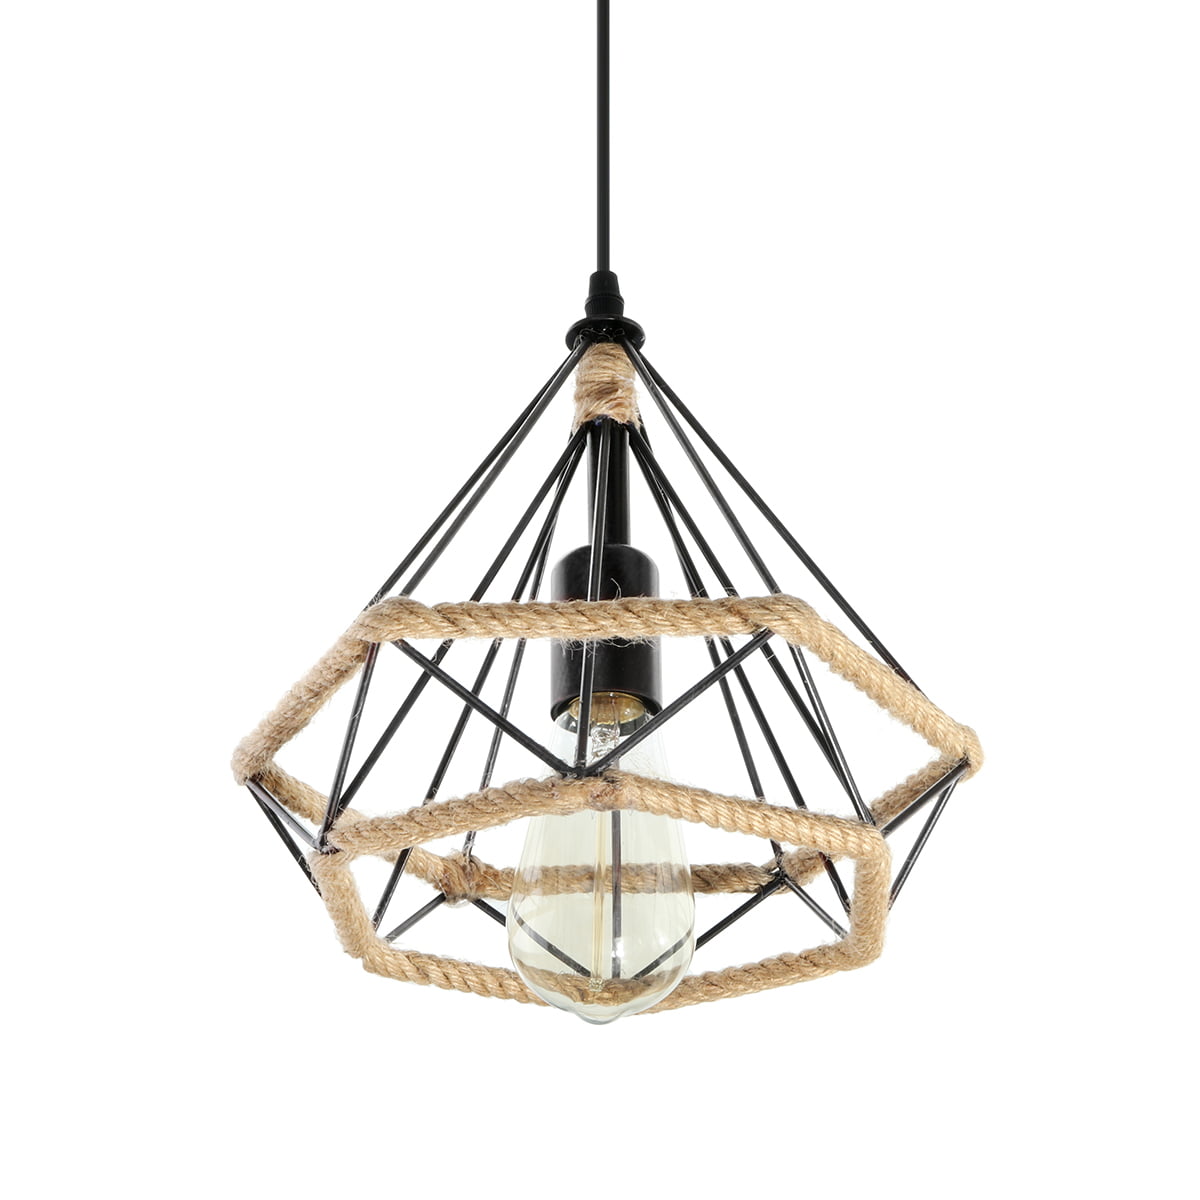 Chandeliers Loft Round Wooden Chandelier with Seeded Glass Shade Rope and Metal Pendant 6 Lights Lighting Fixture Retro Rustic Antique Ceiling Lamp 25 in